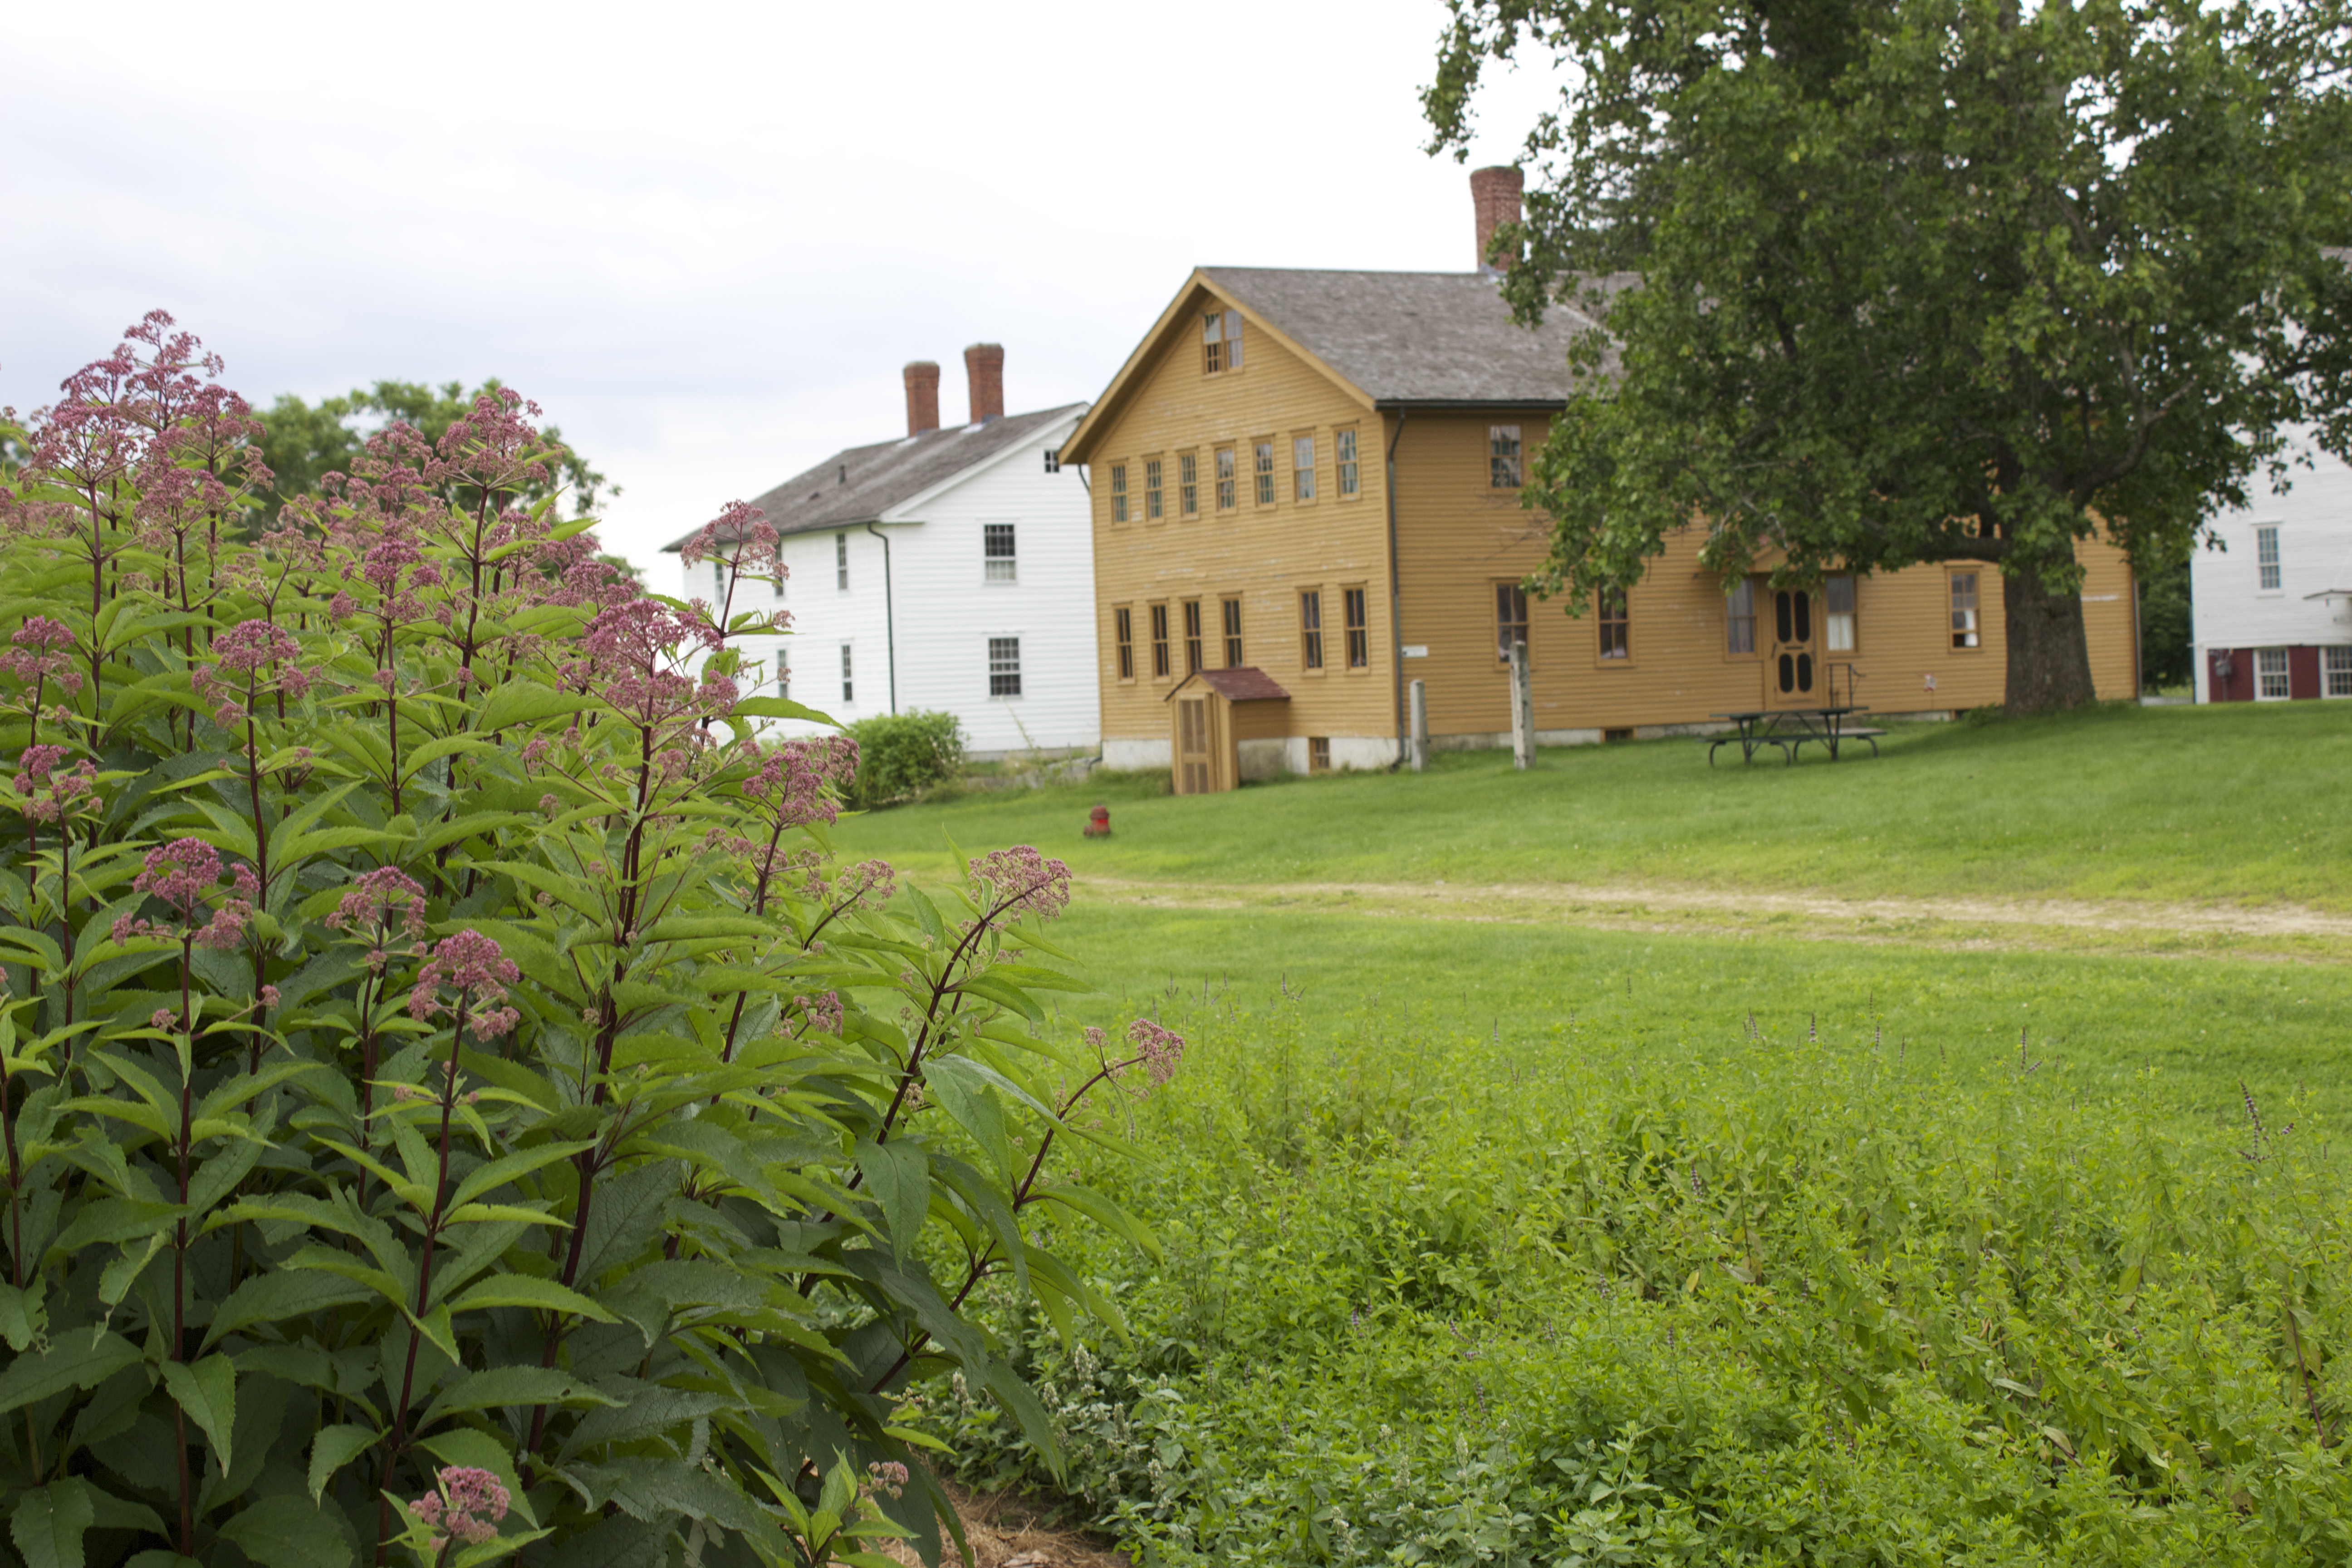 Tall 'Queen of the Meadow' plants on the left frame buildings at the Shaker Village in Canterbury, NH